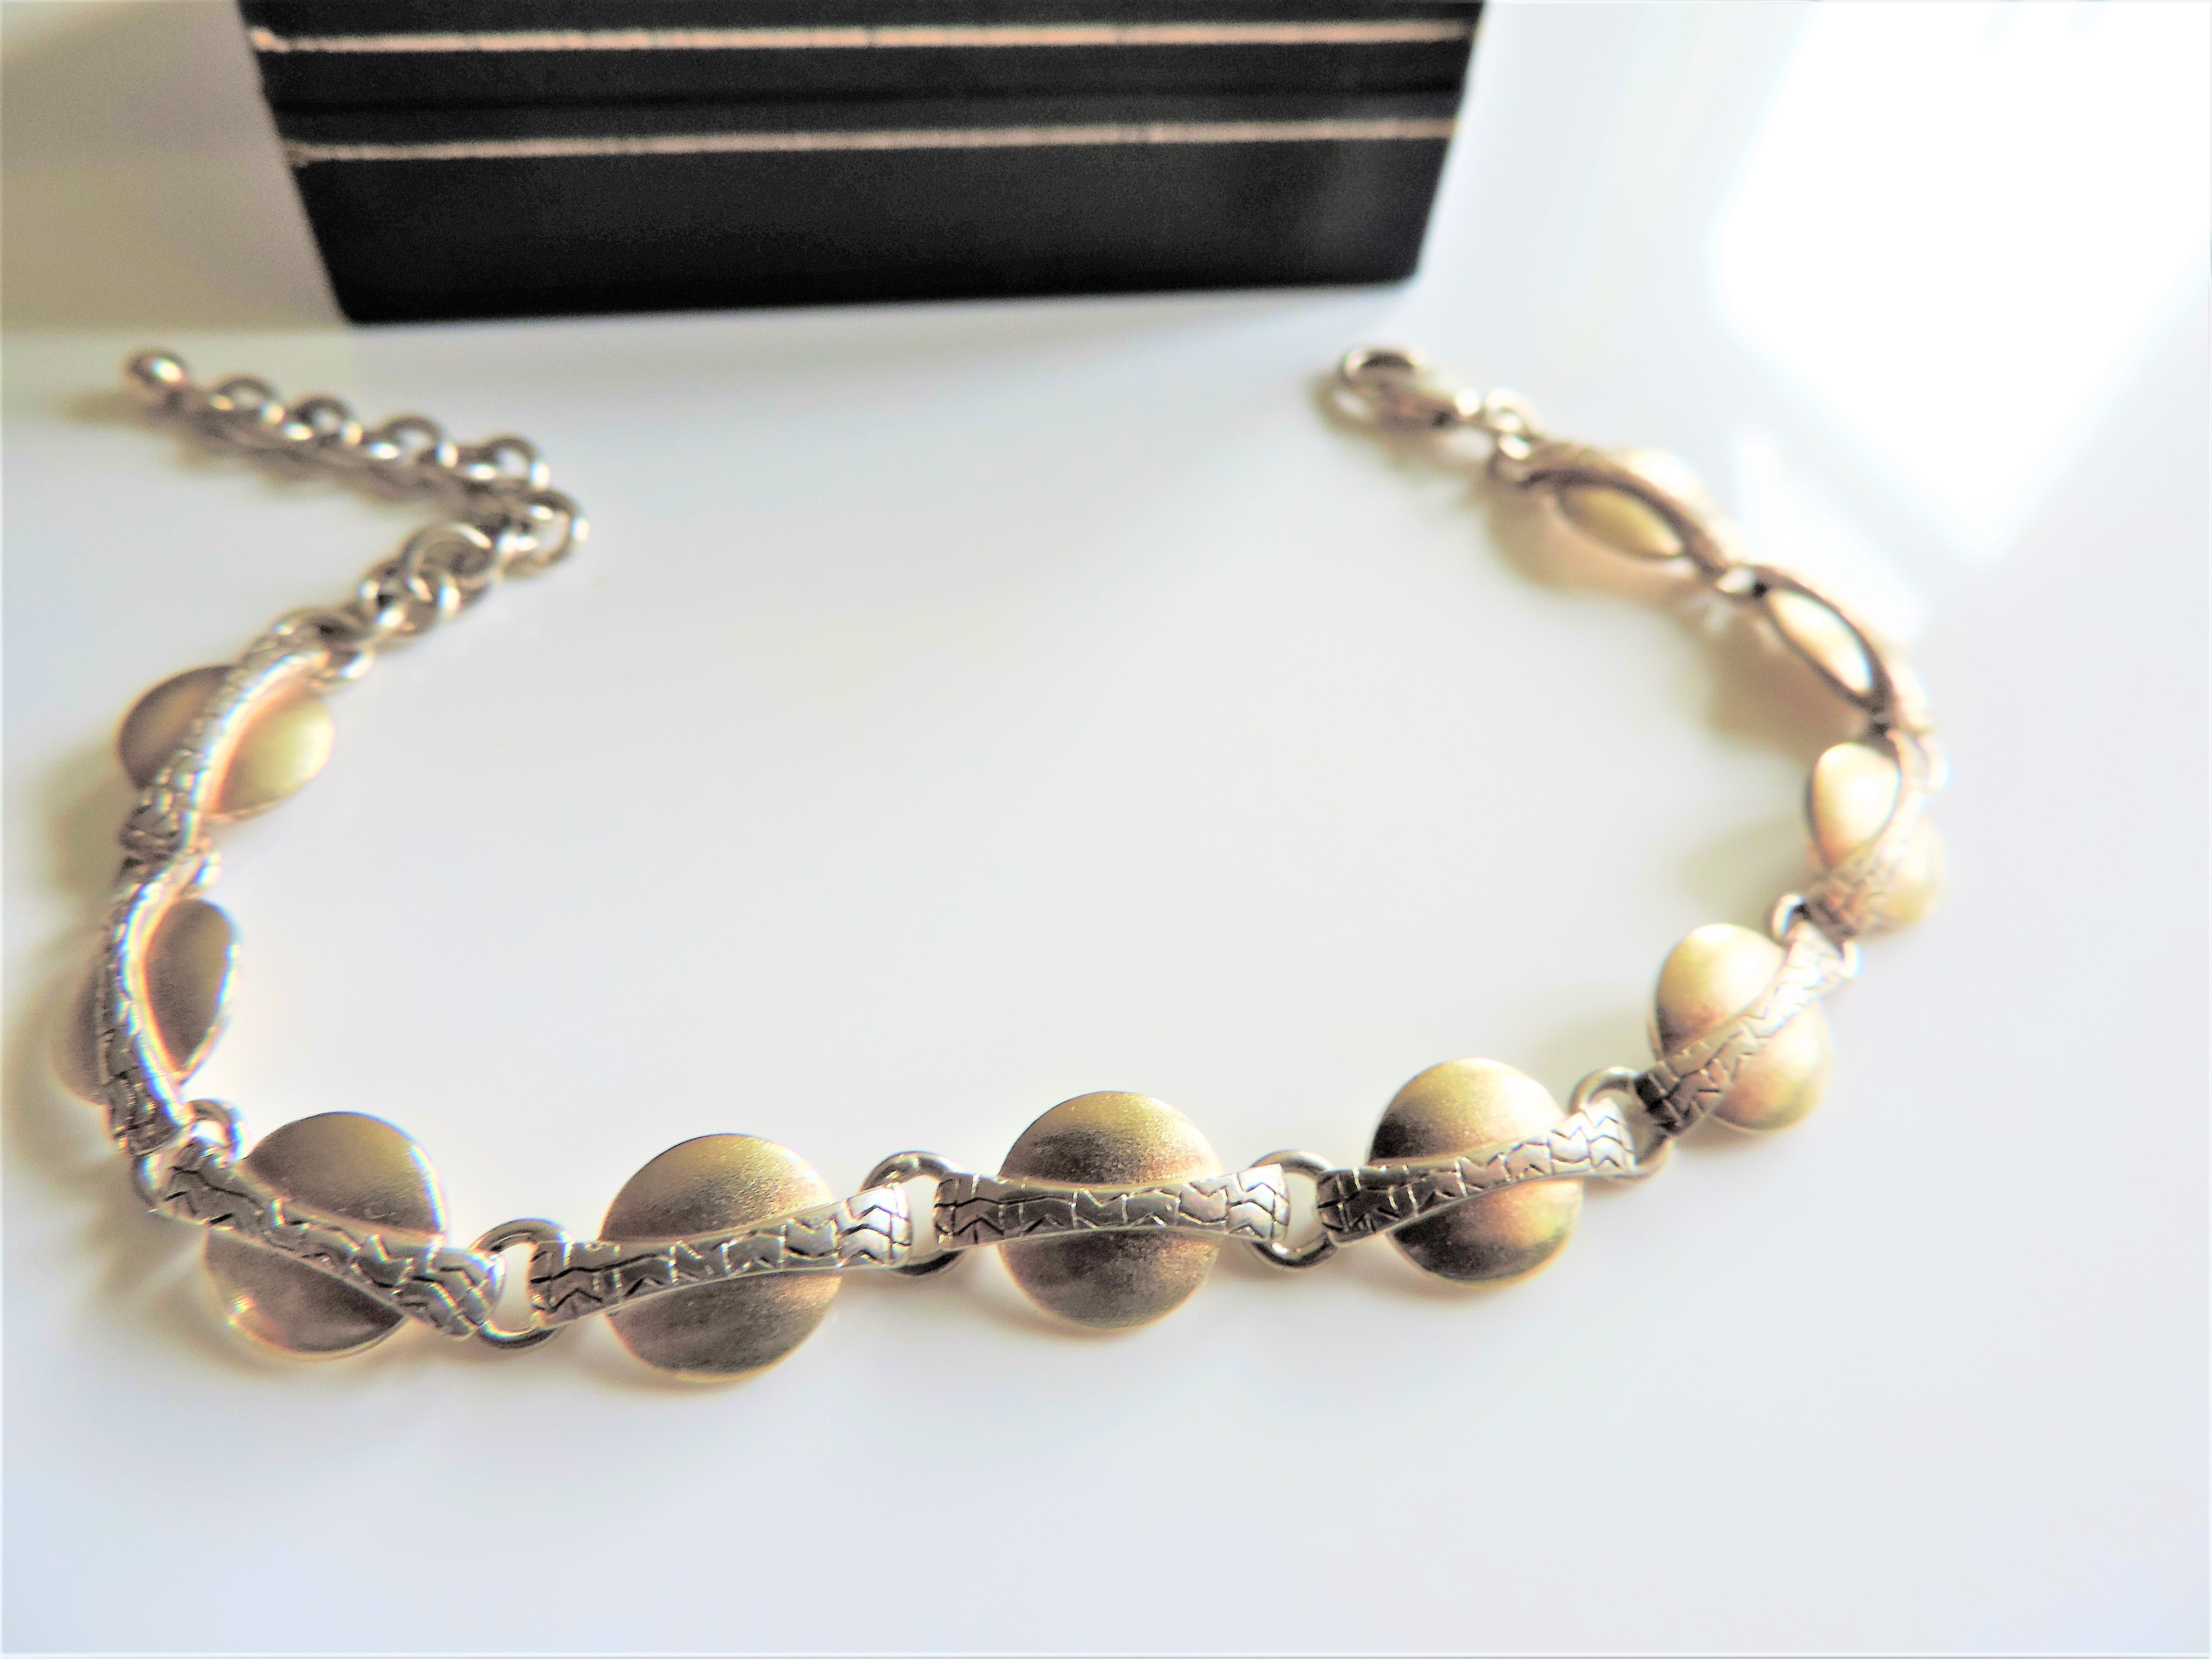 Gold & Sterling Silver Two Tone Bracelet - Image 3 of 3